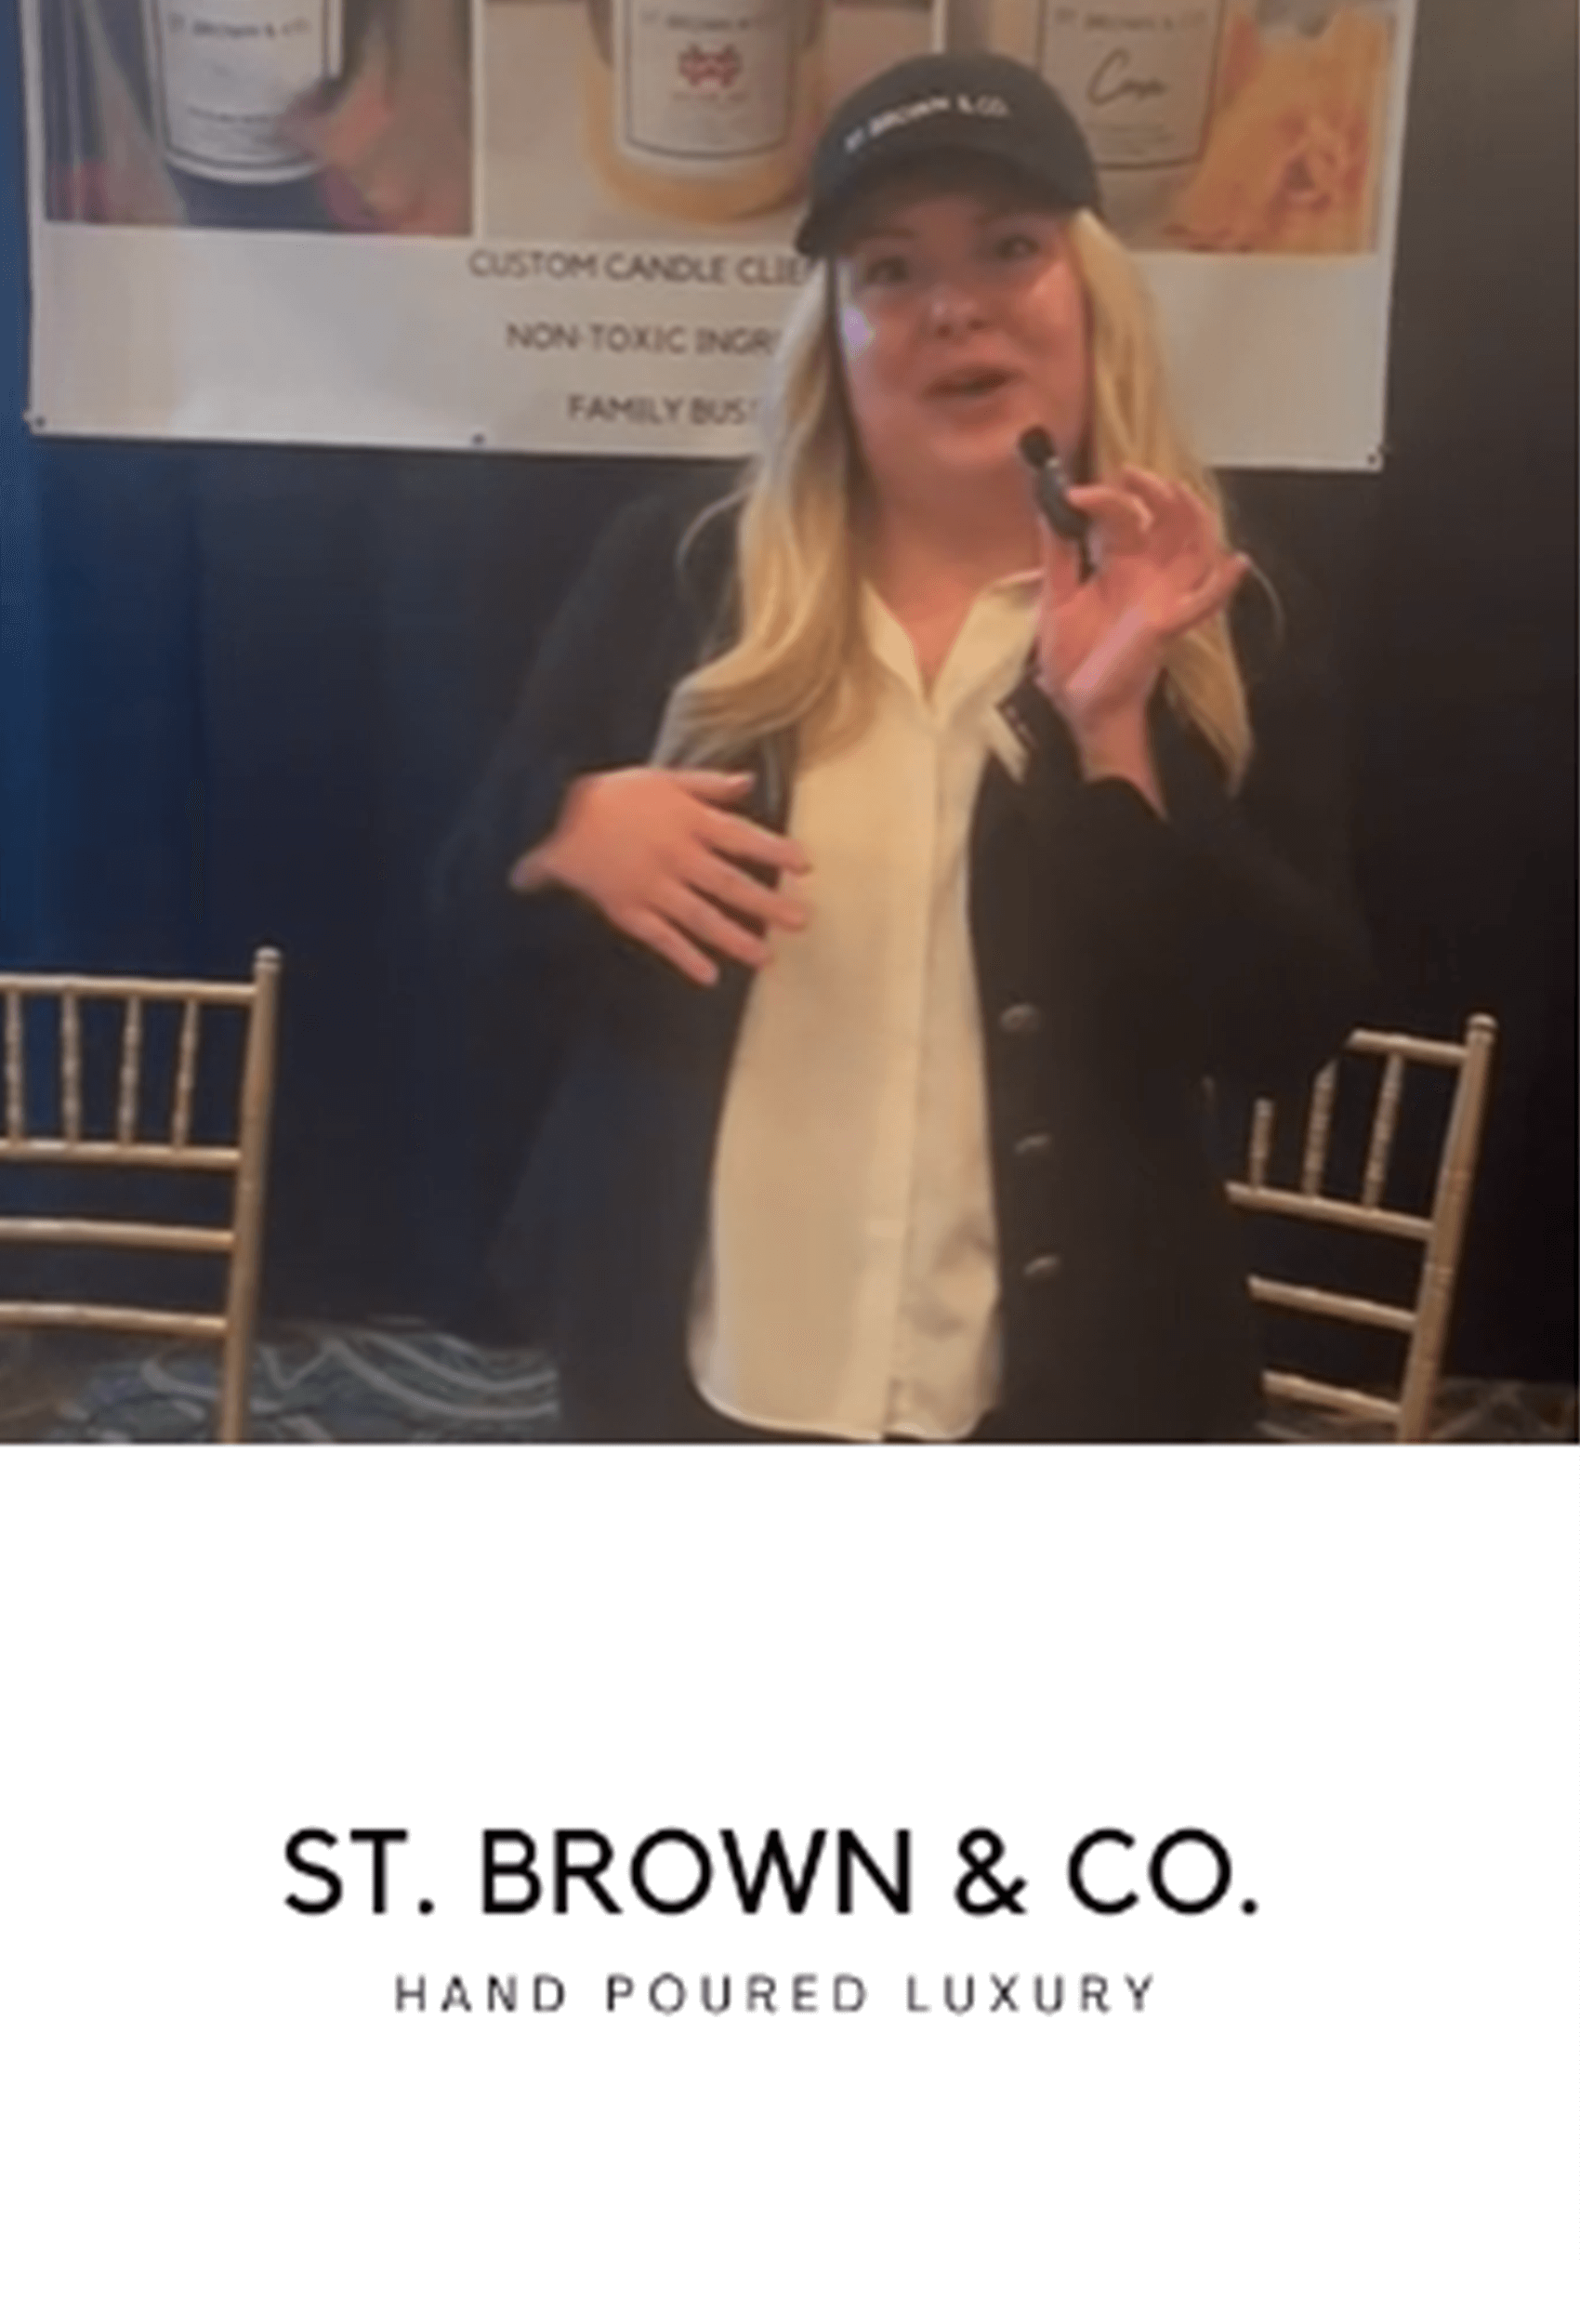 ST. BROWN & CO Short video